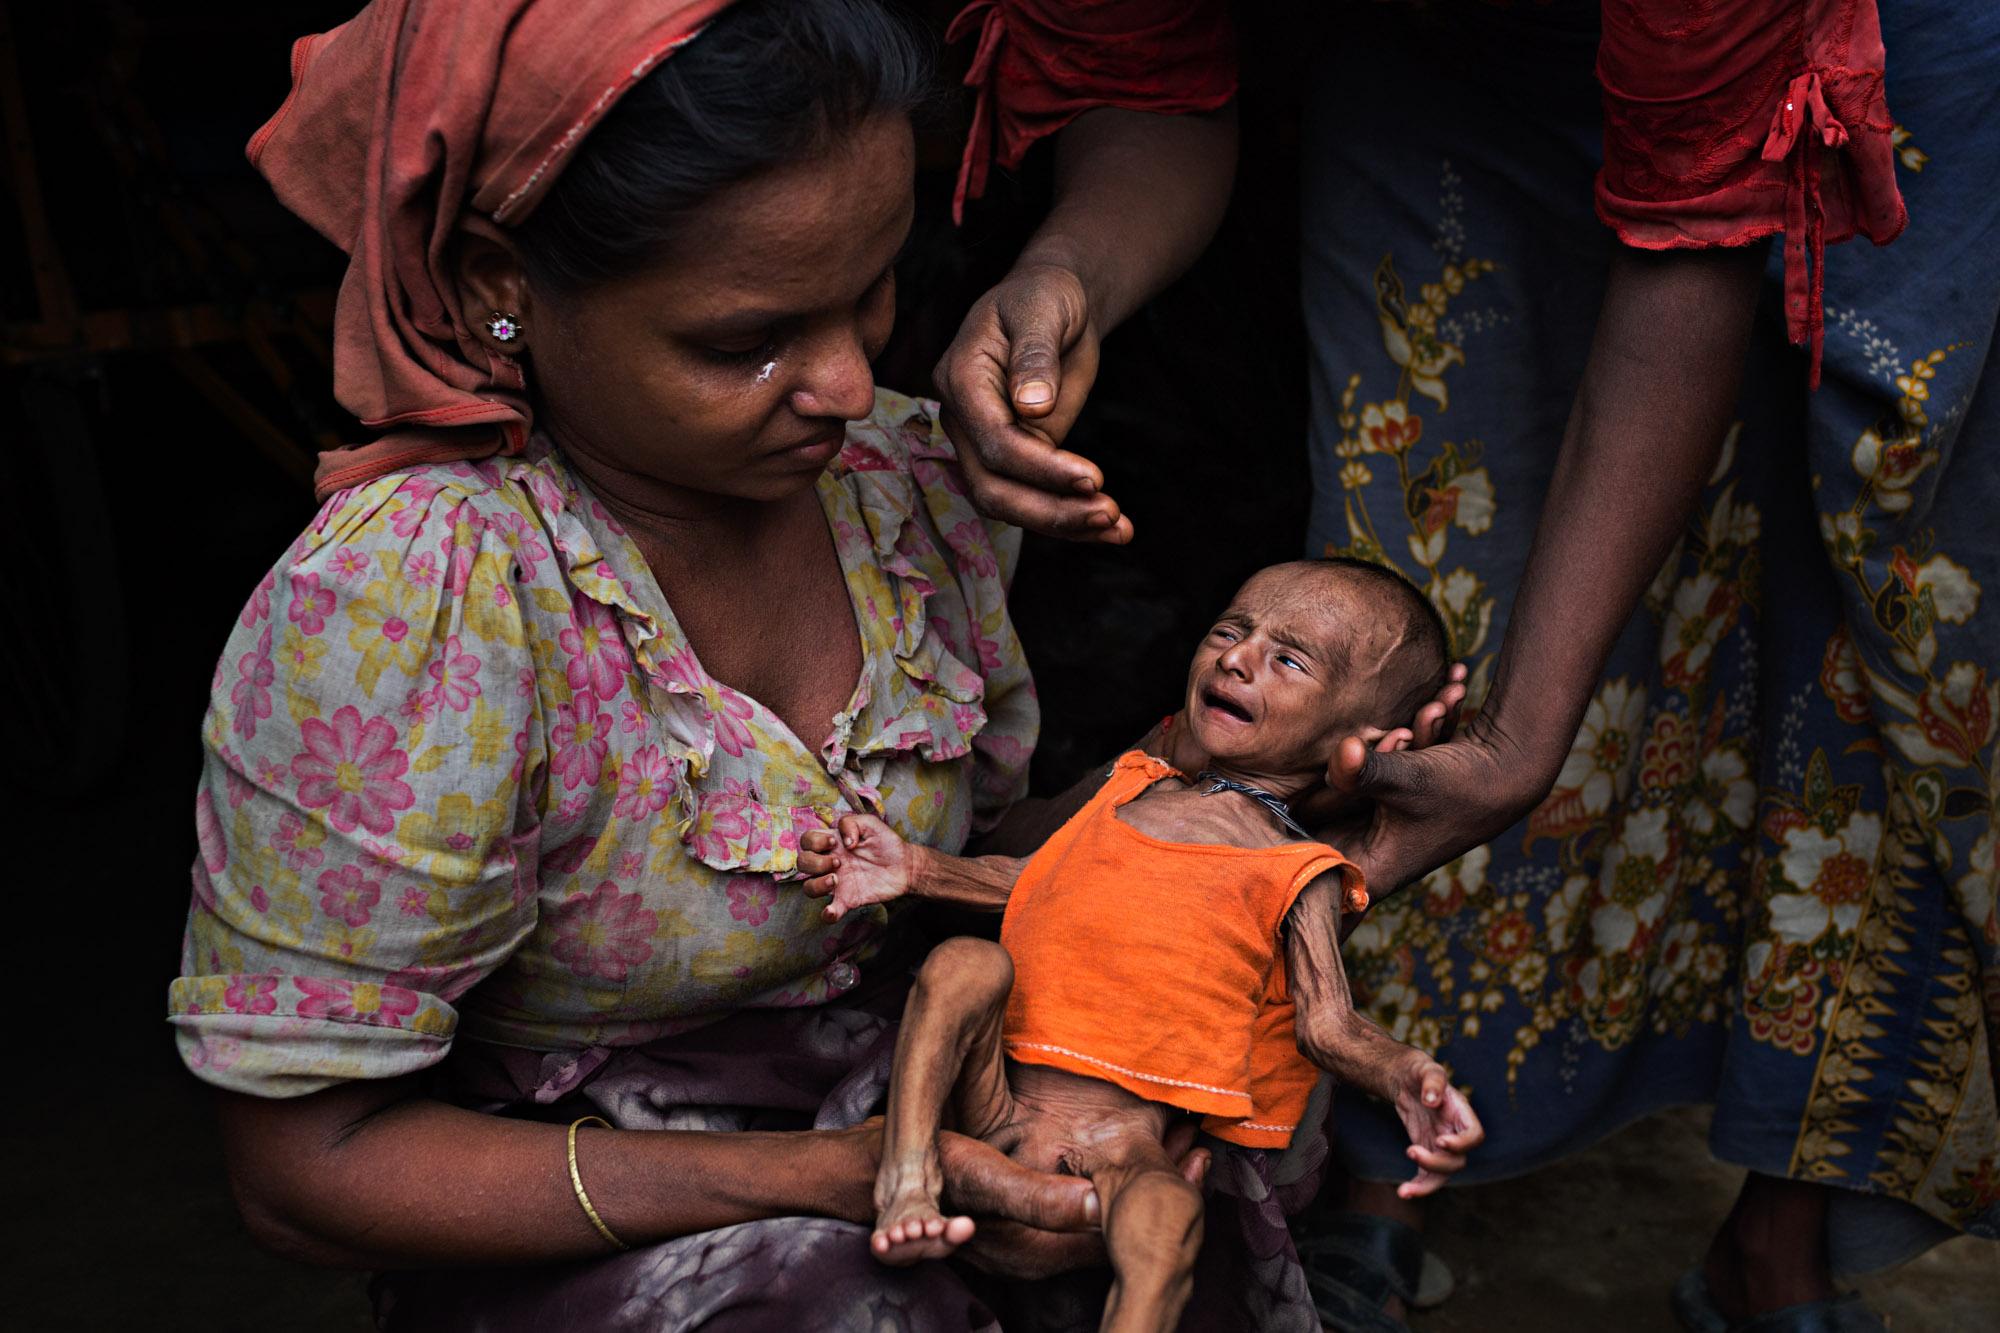  A Rohingya woman cries while holding her severely malnourished child in a refugee camp in Sittwe, Myanmar, May 2014. At this time, the Myanmar government banned foreign aid groups from operating in the camps. 